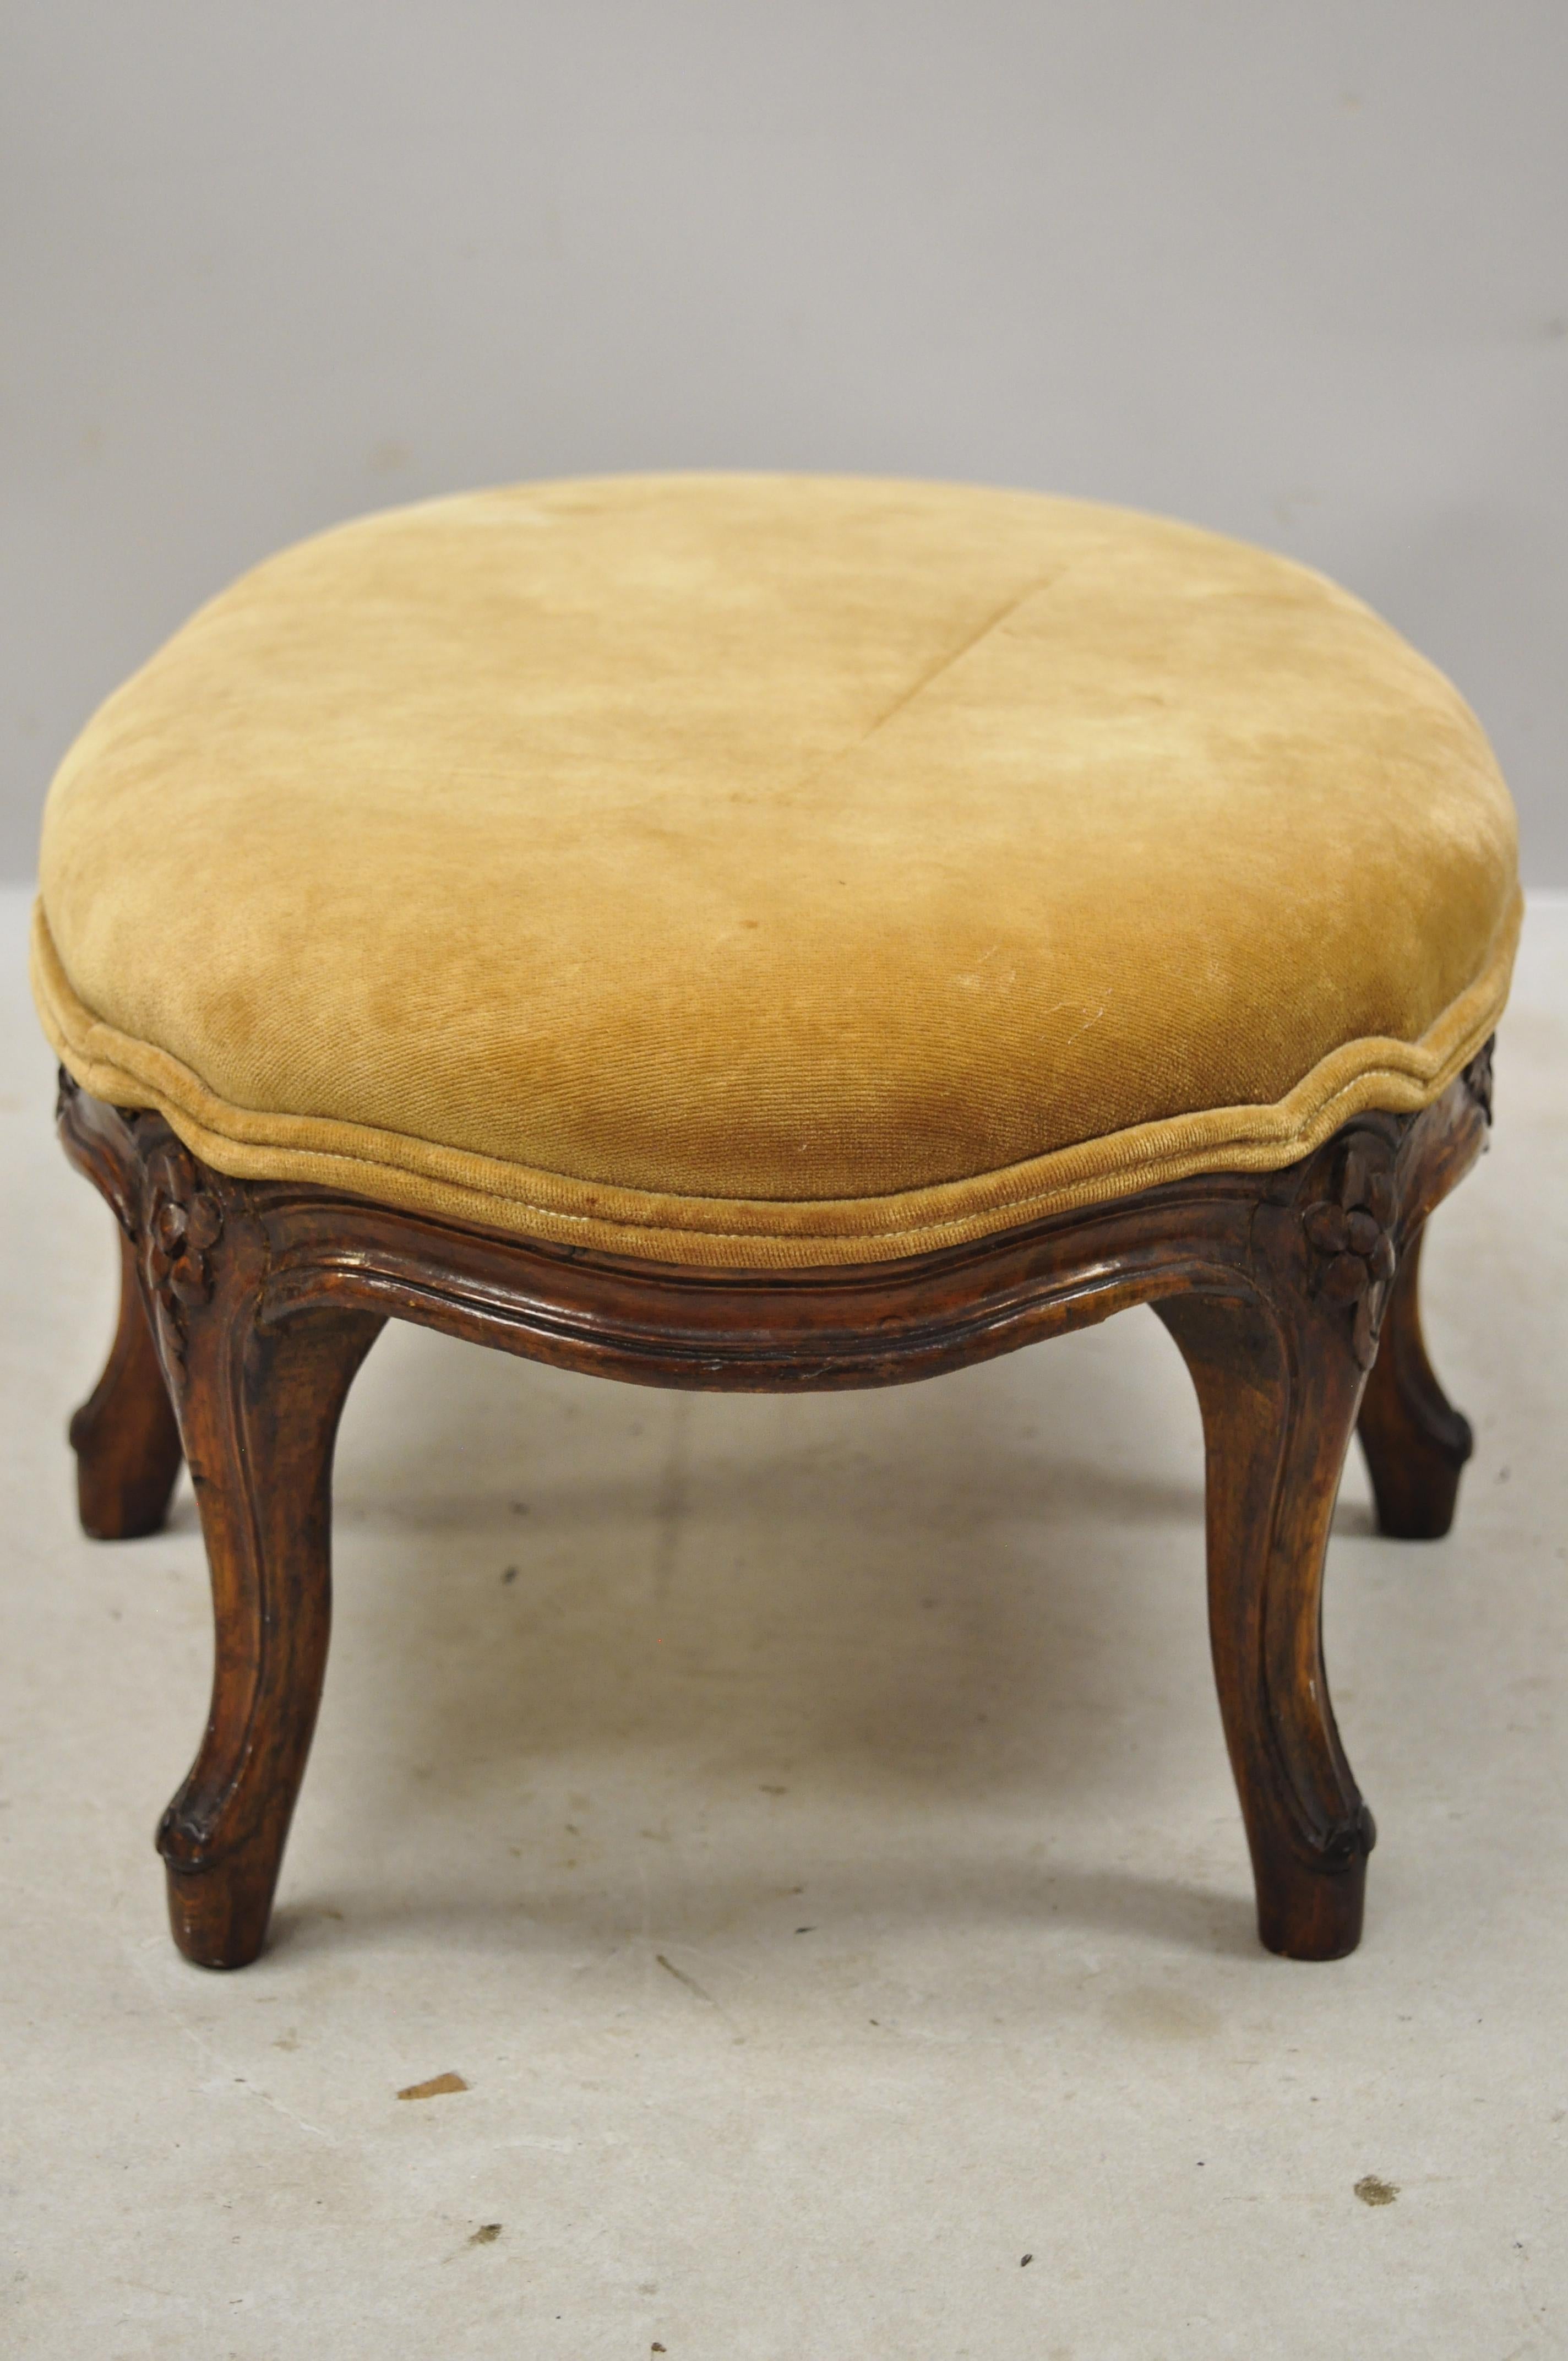 20th Century French Country Louis XV Provincial Walnut Small Petite Oval Footstool Ottoman